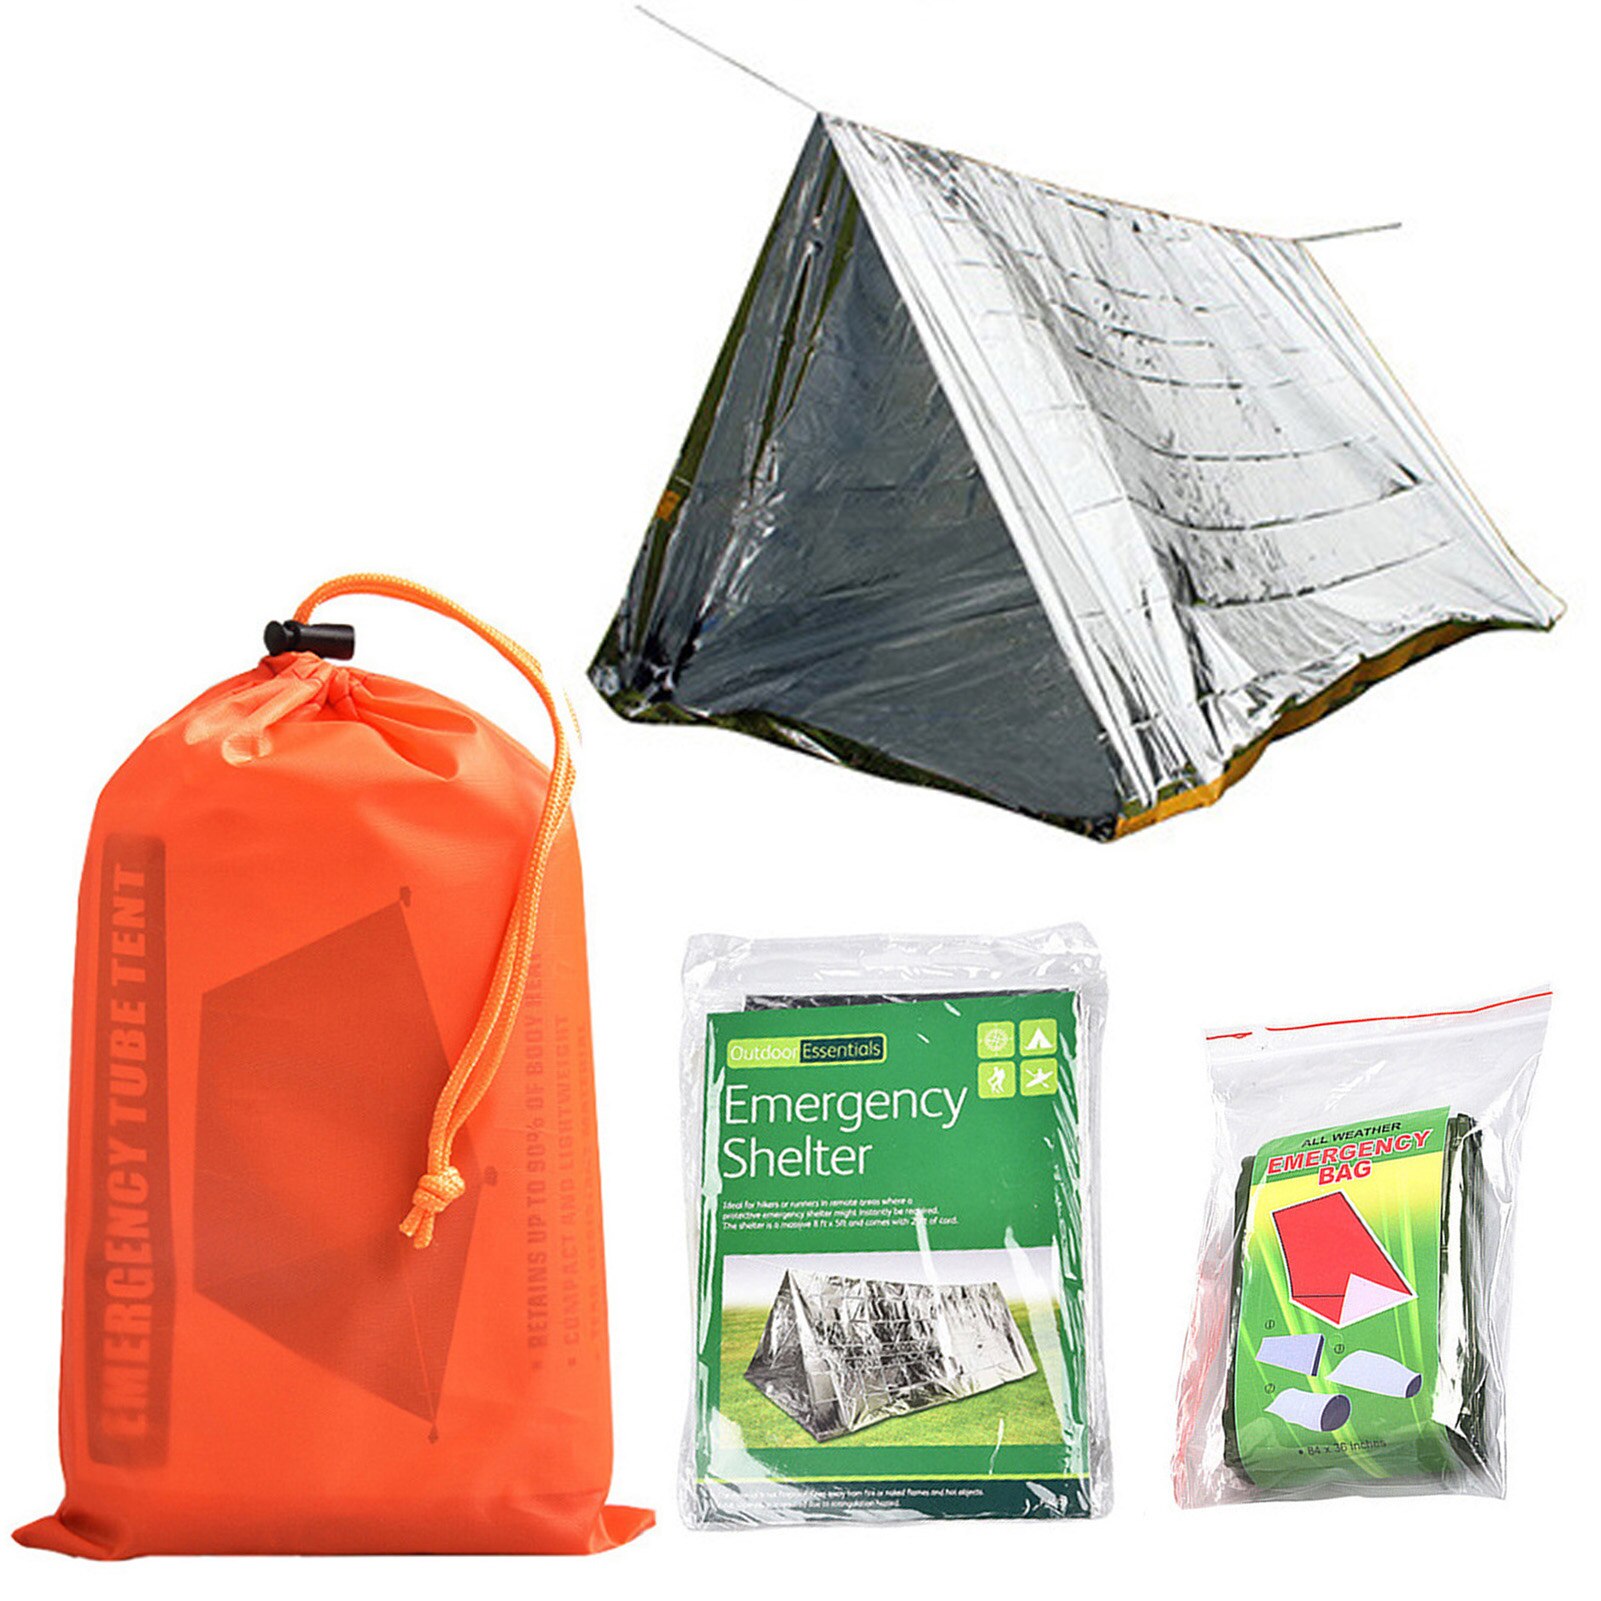 Outdoor 2 Person Emergency Tent Use As Survival Tent Emergency Shelter Tube Tent Survival Tarp Includes White Rope & Storage Bag